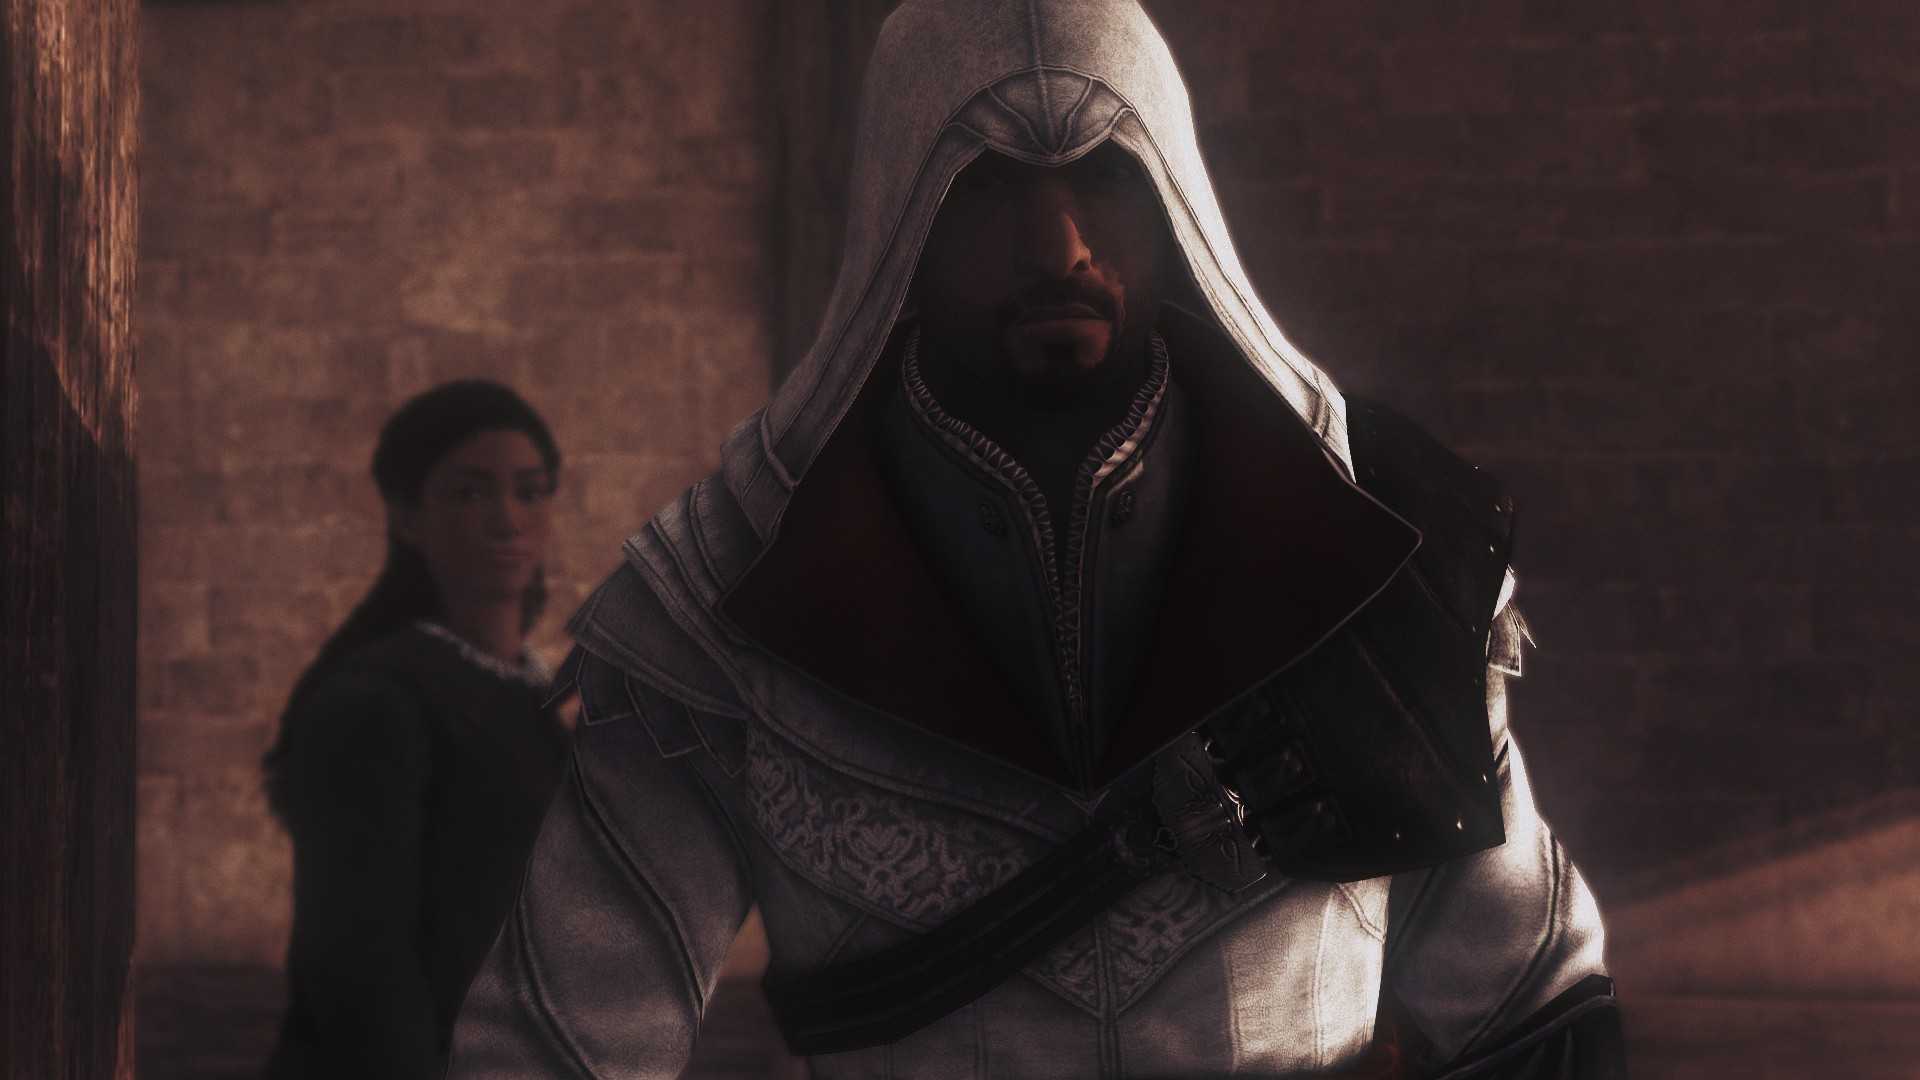 Assassin's creed: brotherhood - pcgamingwiki pcgw - bugs, fixes, crashes, mods, guides and improvements for every pc game